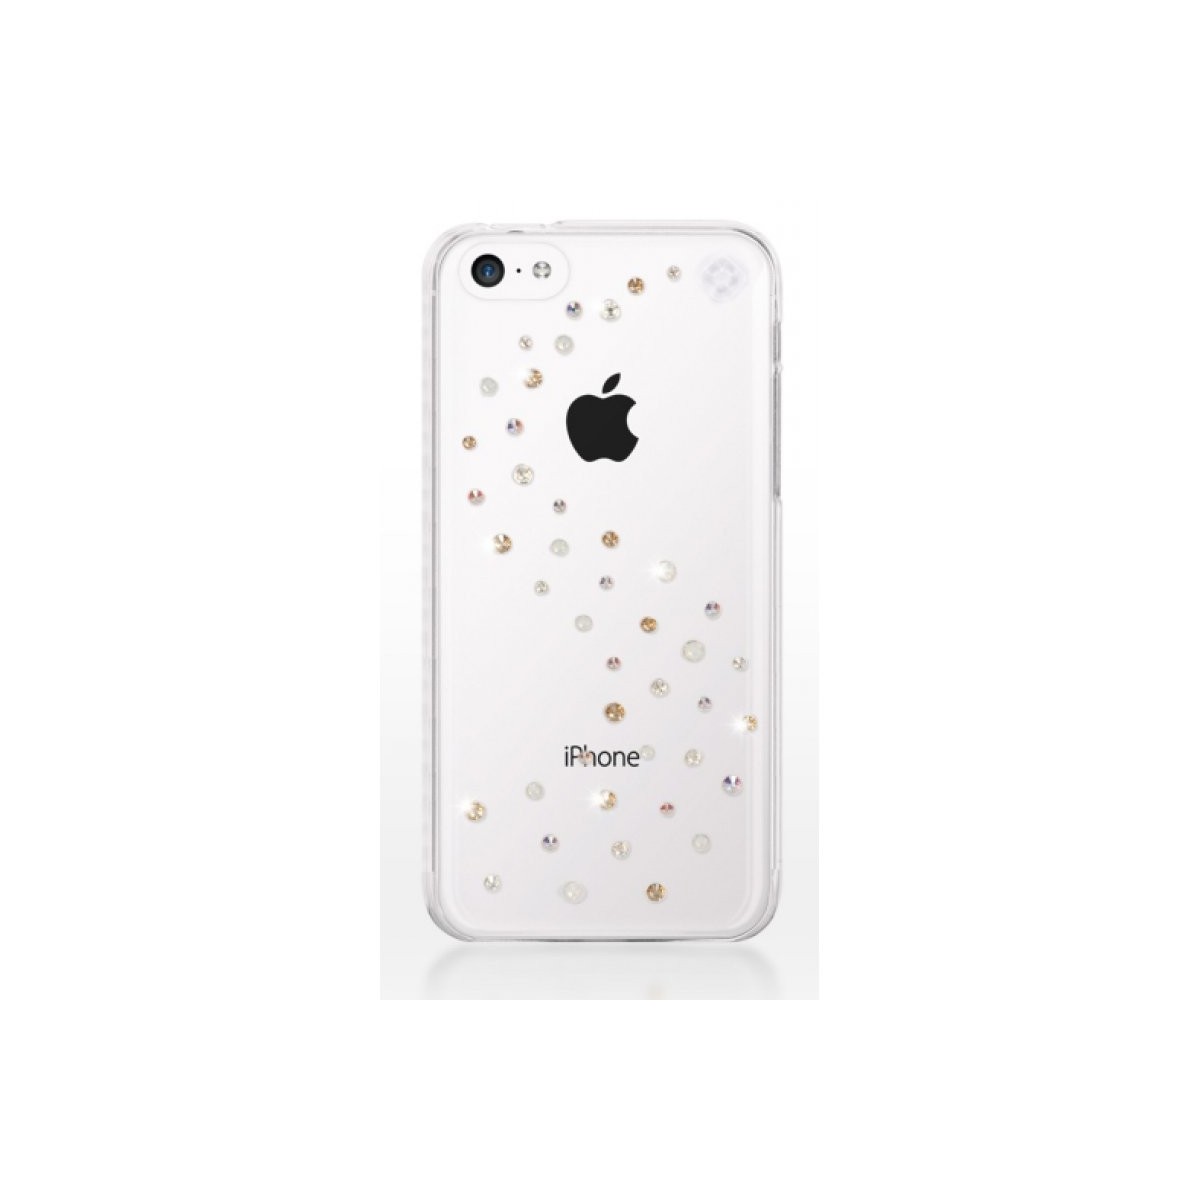 Coque iPhone 5C Milkyway strass mixtes Swarovski - Bling My Thing